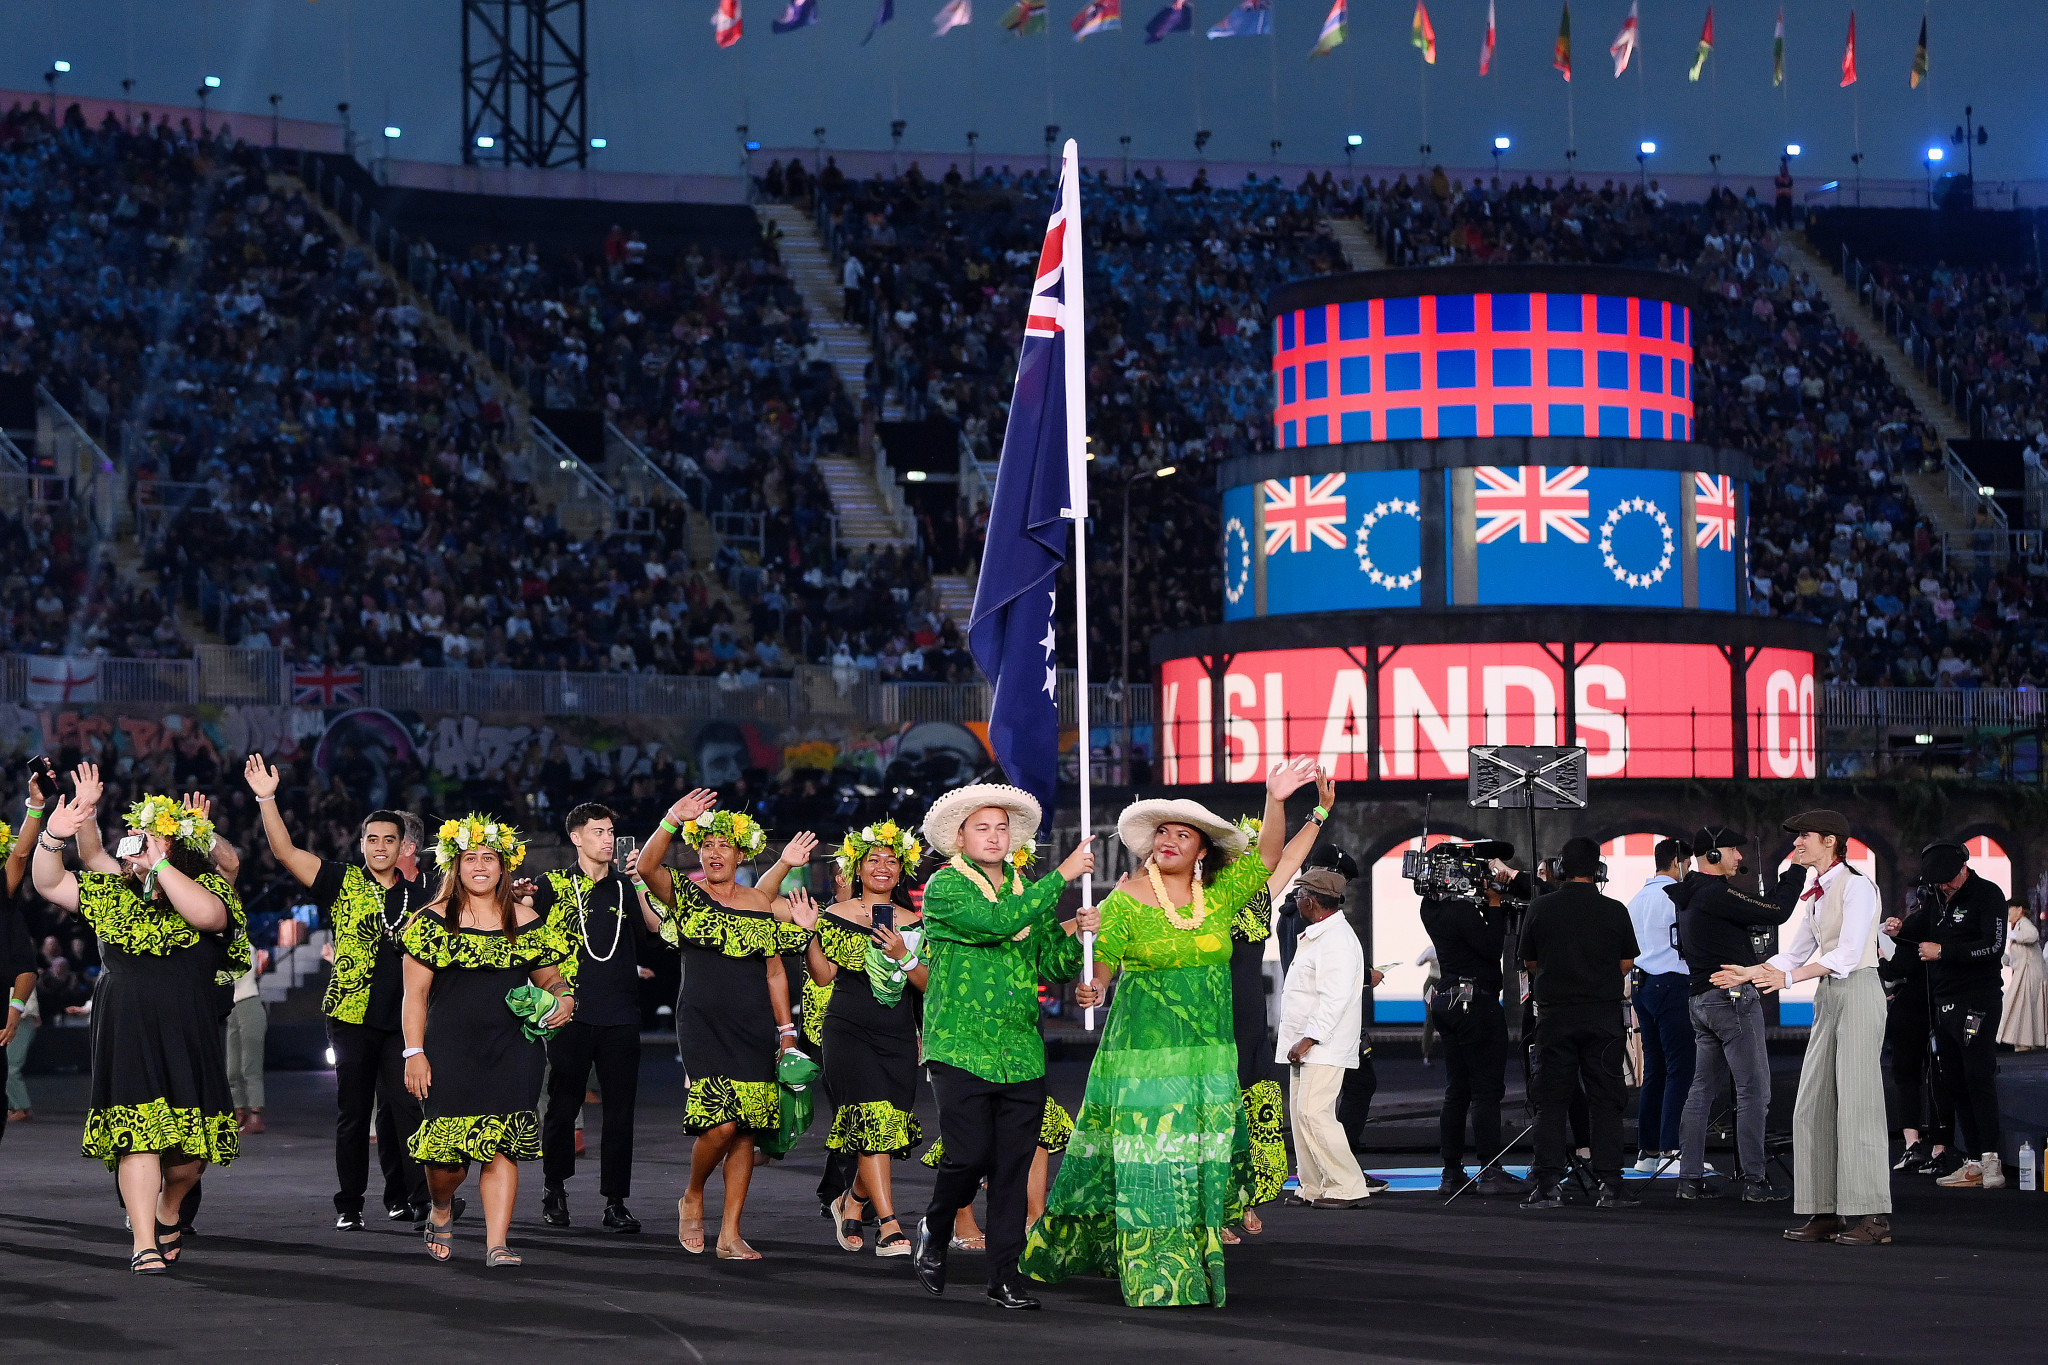 The Cook Islands had mixed results at international events such as the Commonwealth Games, due to preparation time and issues related to COVID ©Getty Images